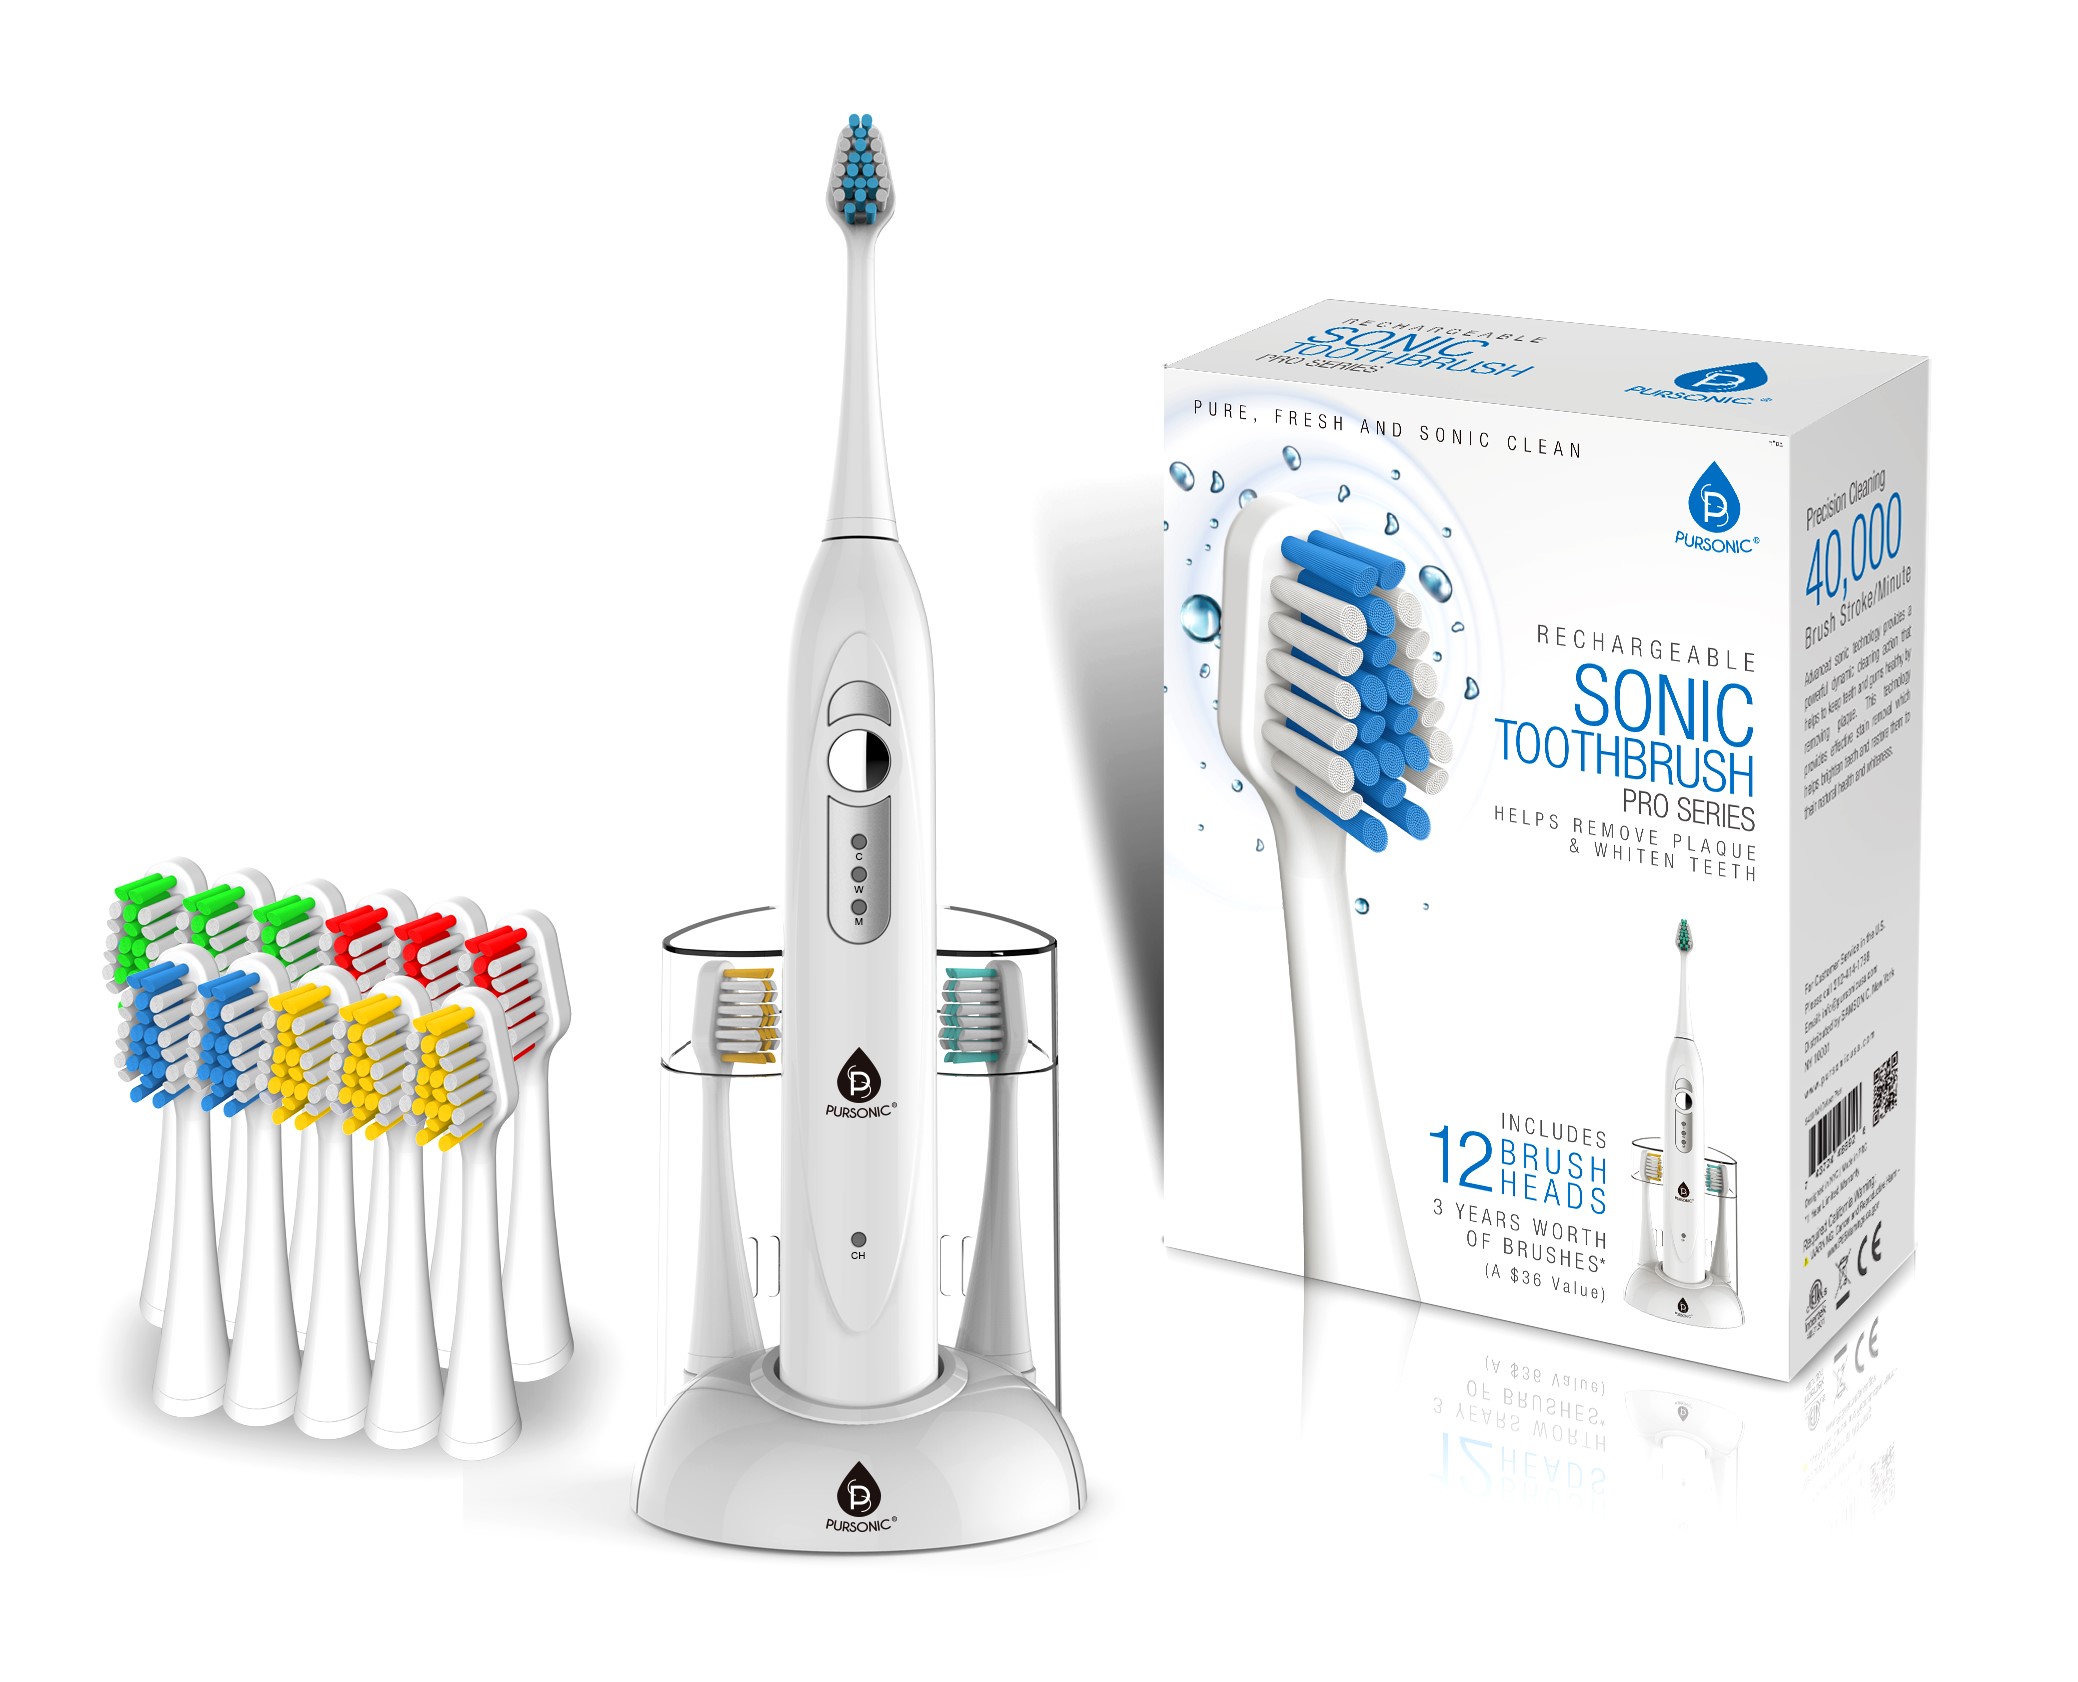 Rechargeable Electric Sonic Toothbrush With 40000 Strokes Per Minute, White